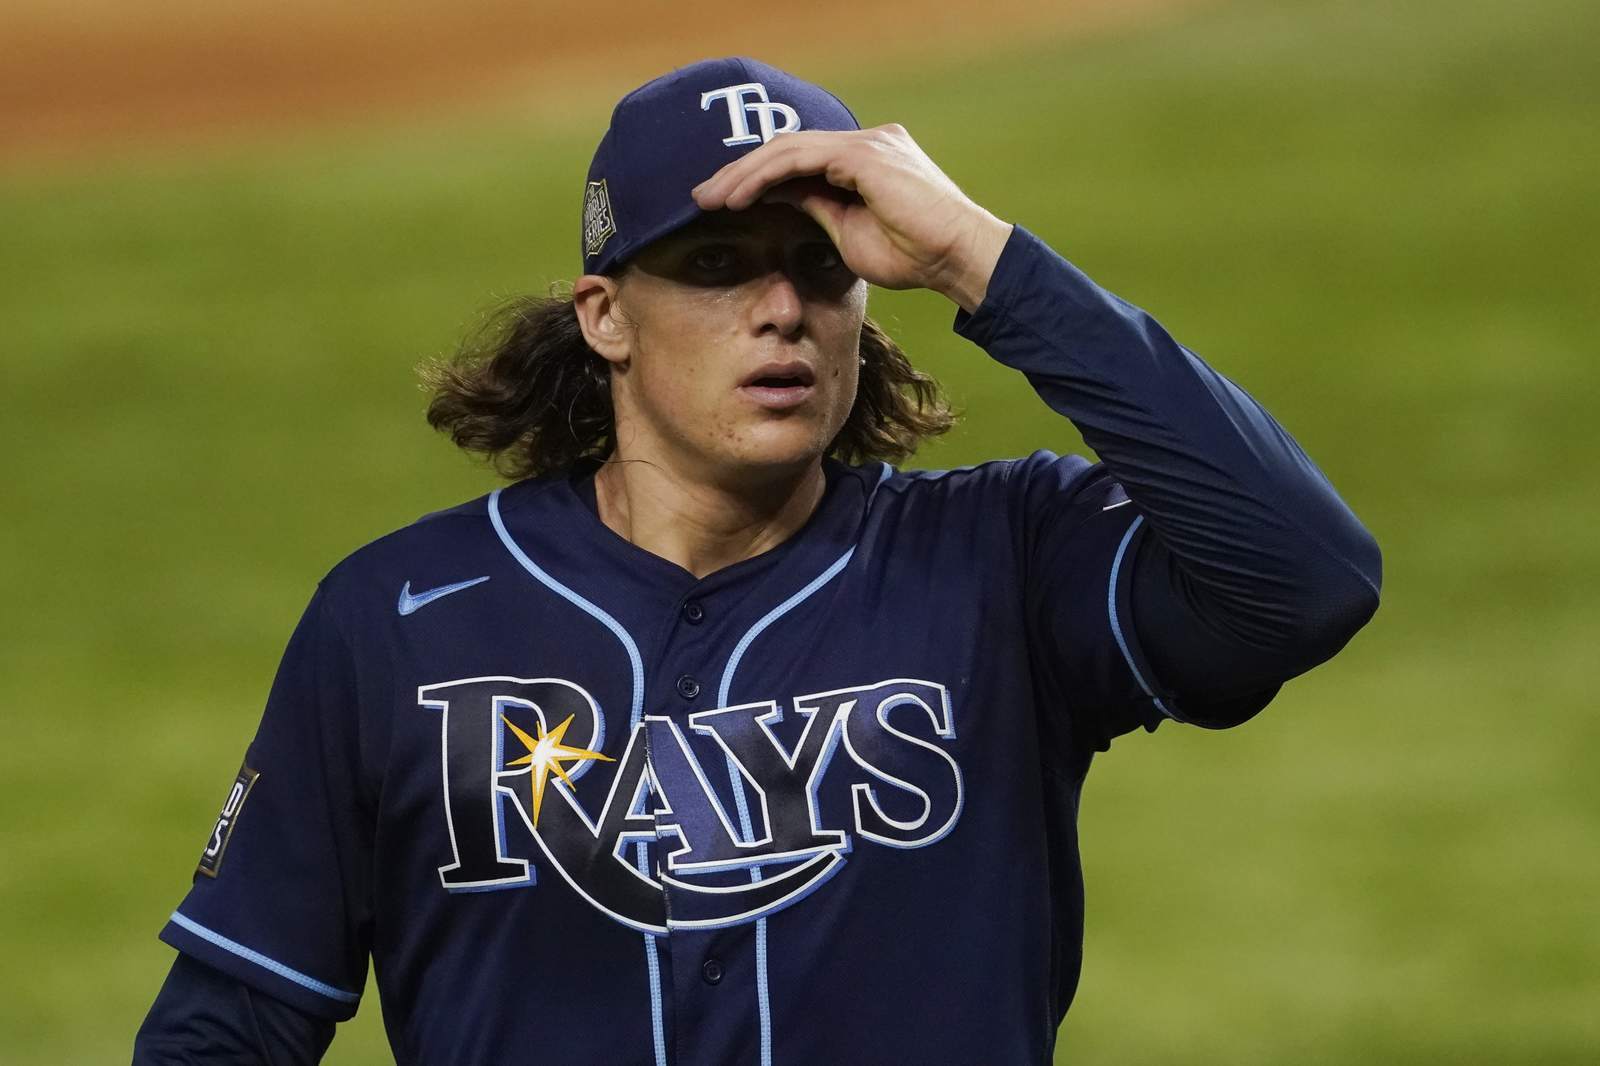 Glasnow wilts, can't stay with Kershaw as Rays drop Game 1